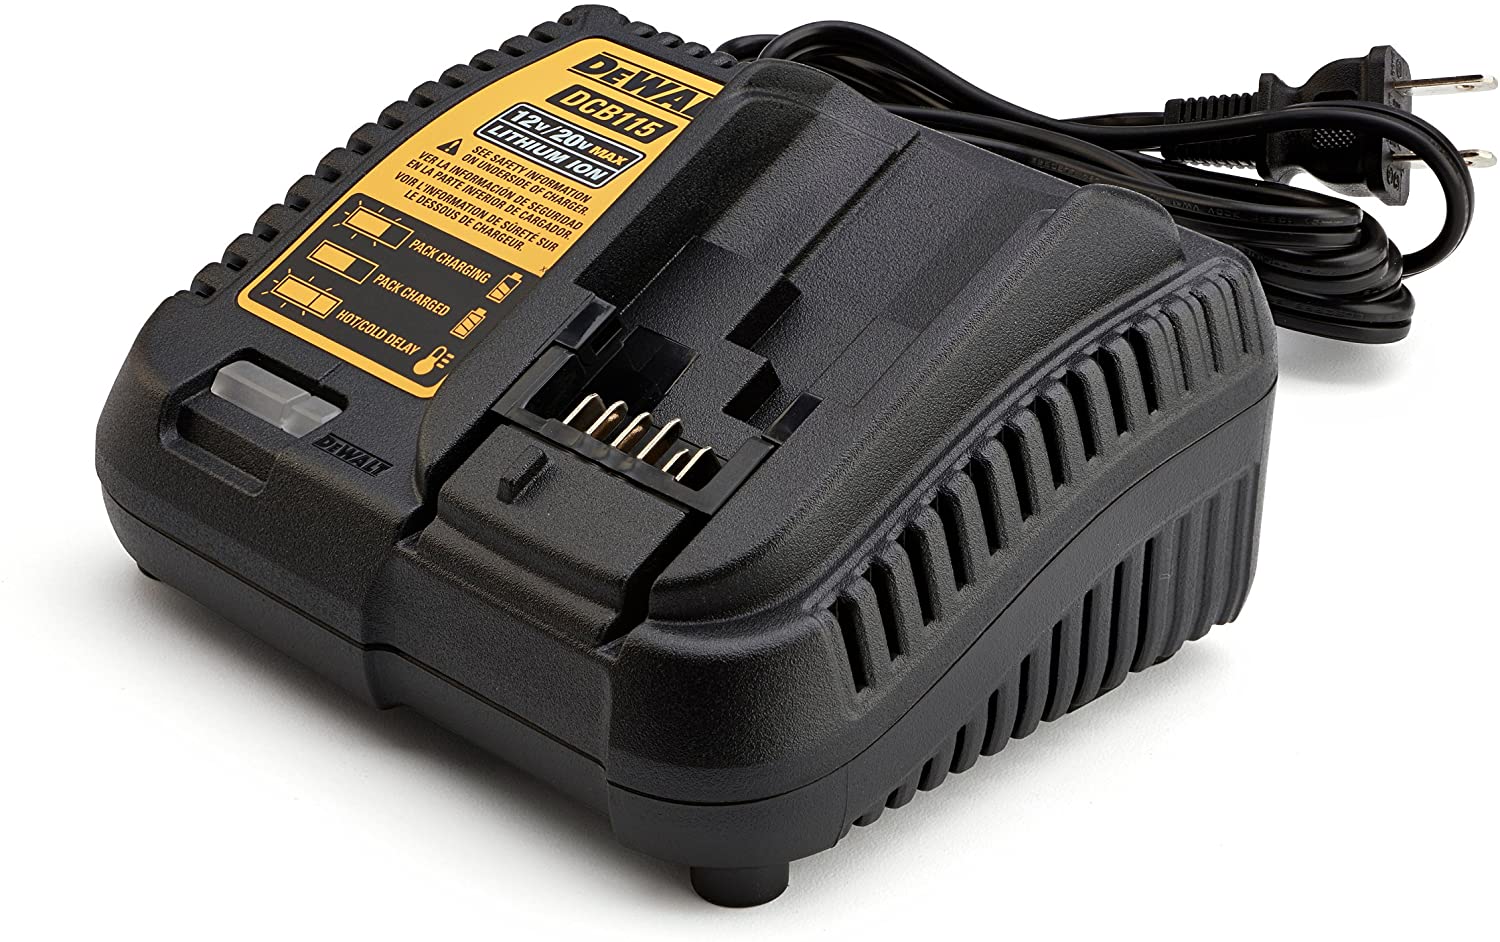 DCB115-GB XR Multi Voltage Li-Ion Battery Charger –